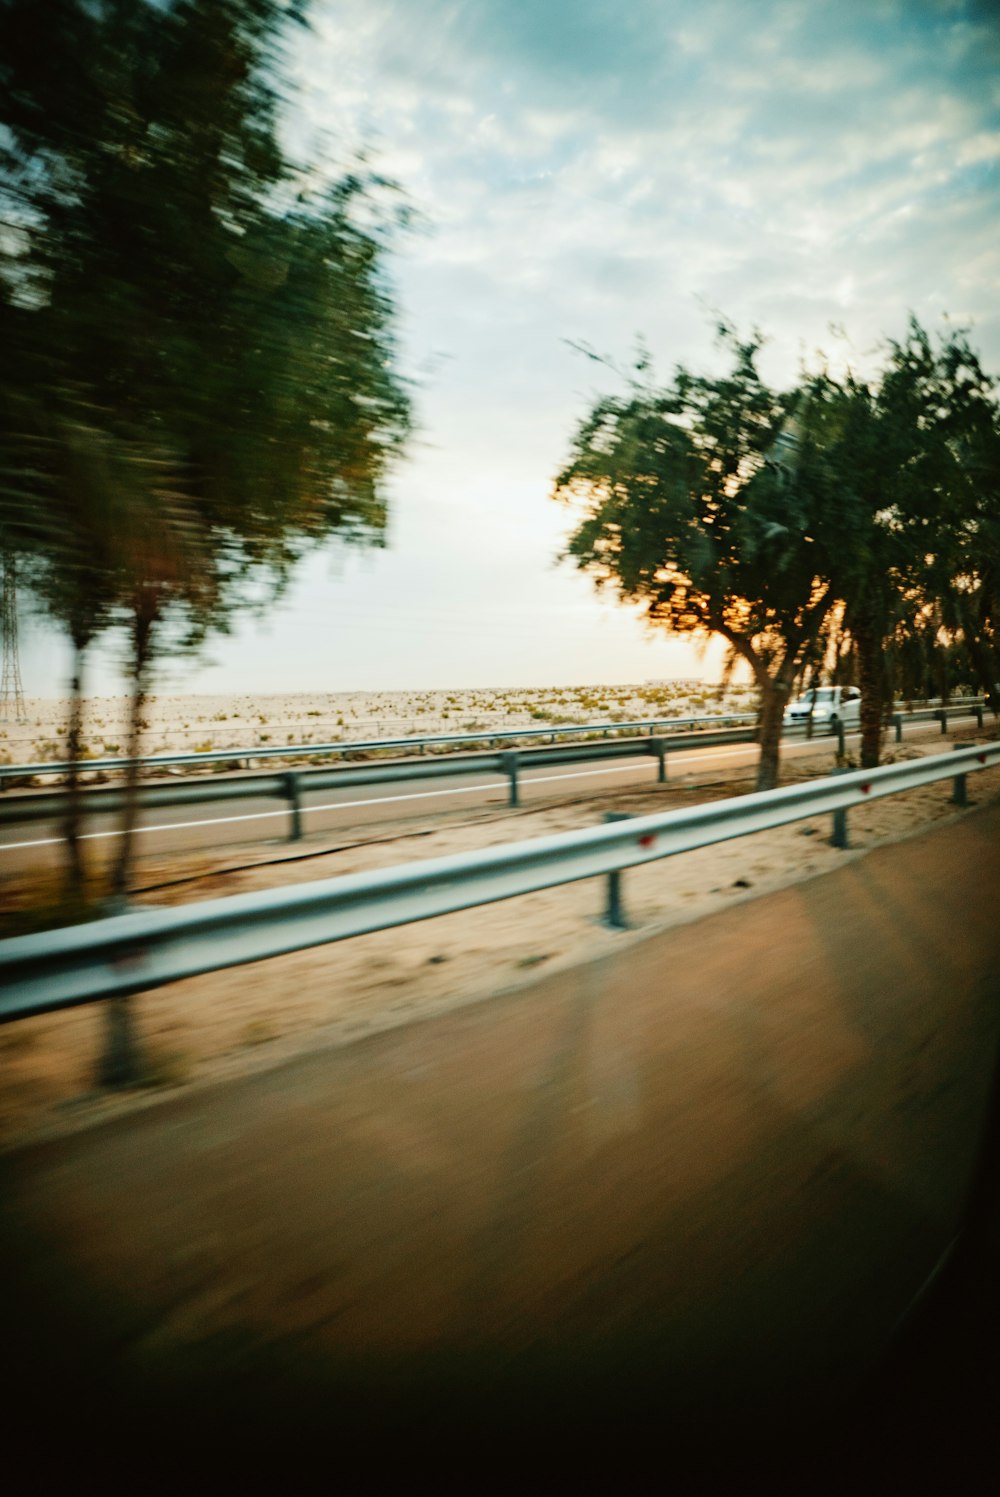 a blurry picture of a highway with trees on the side